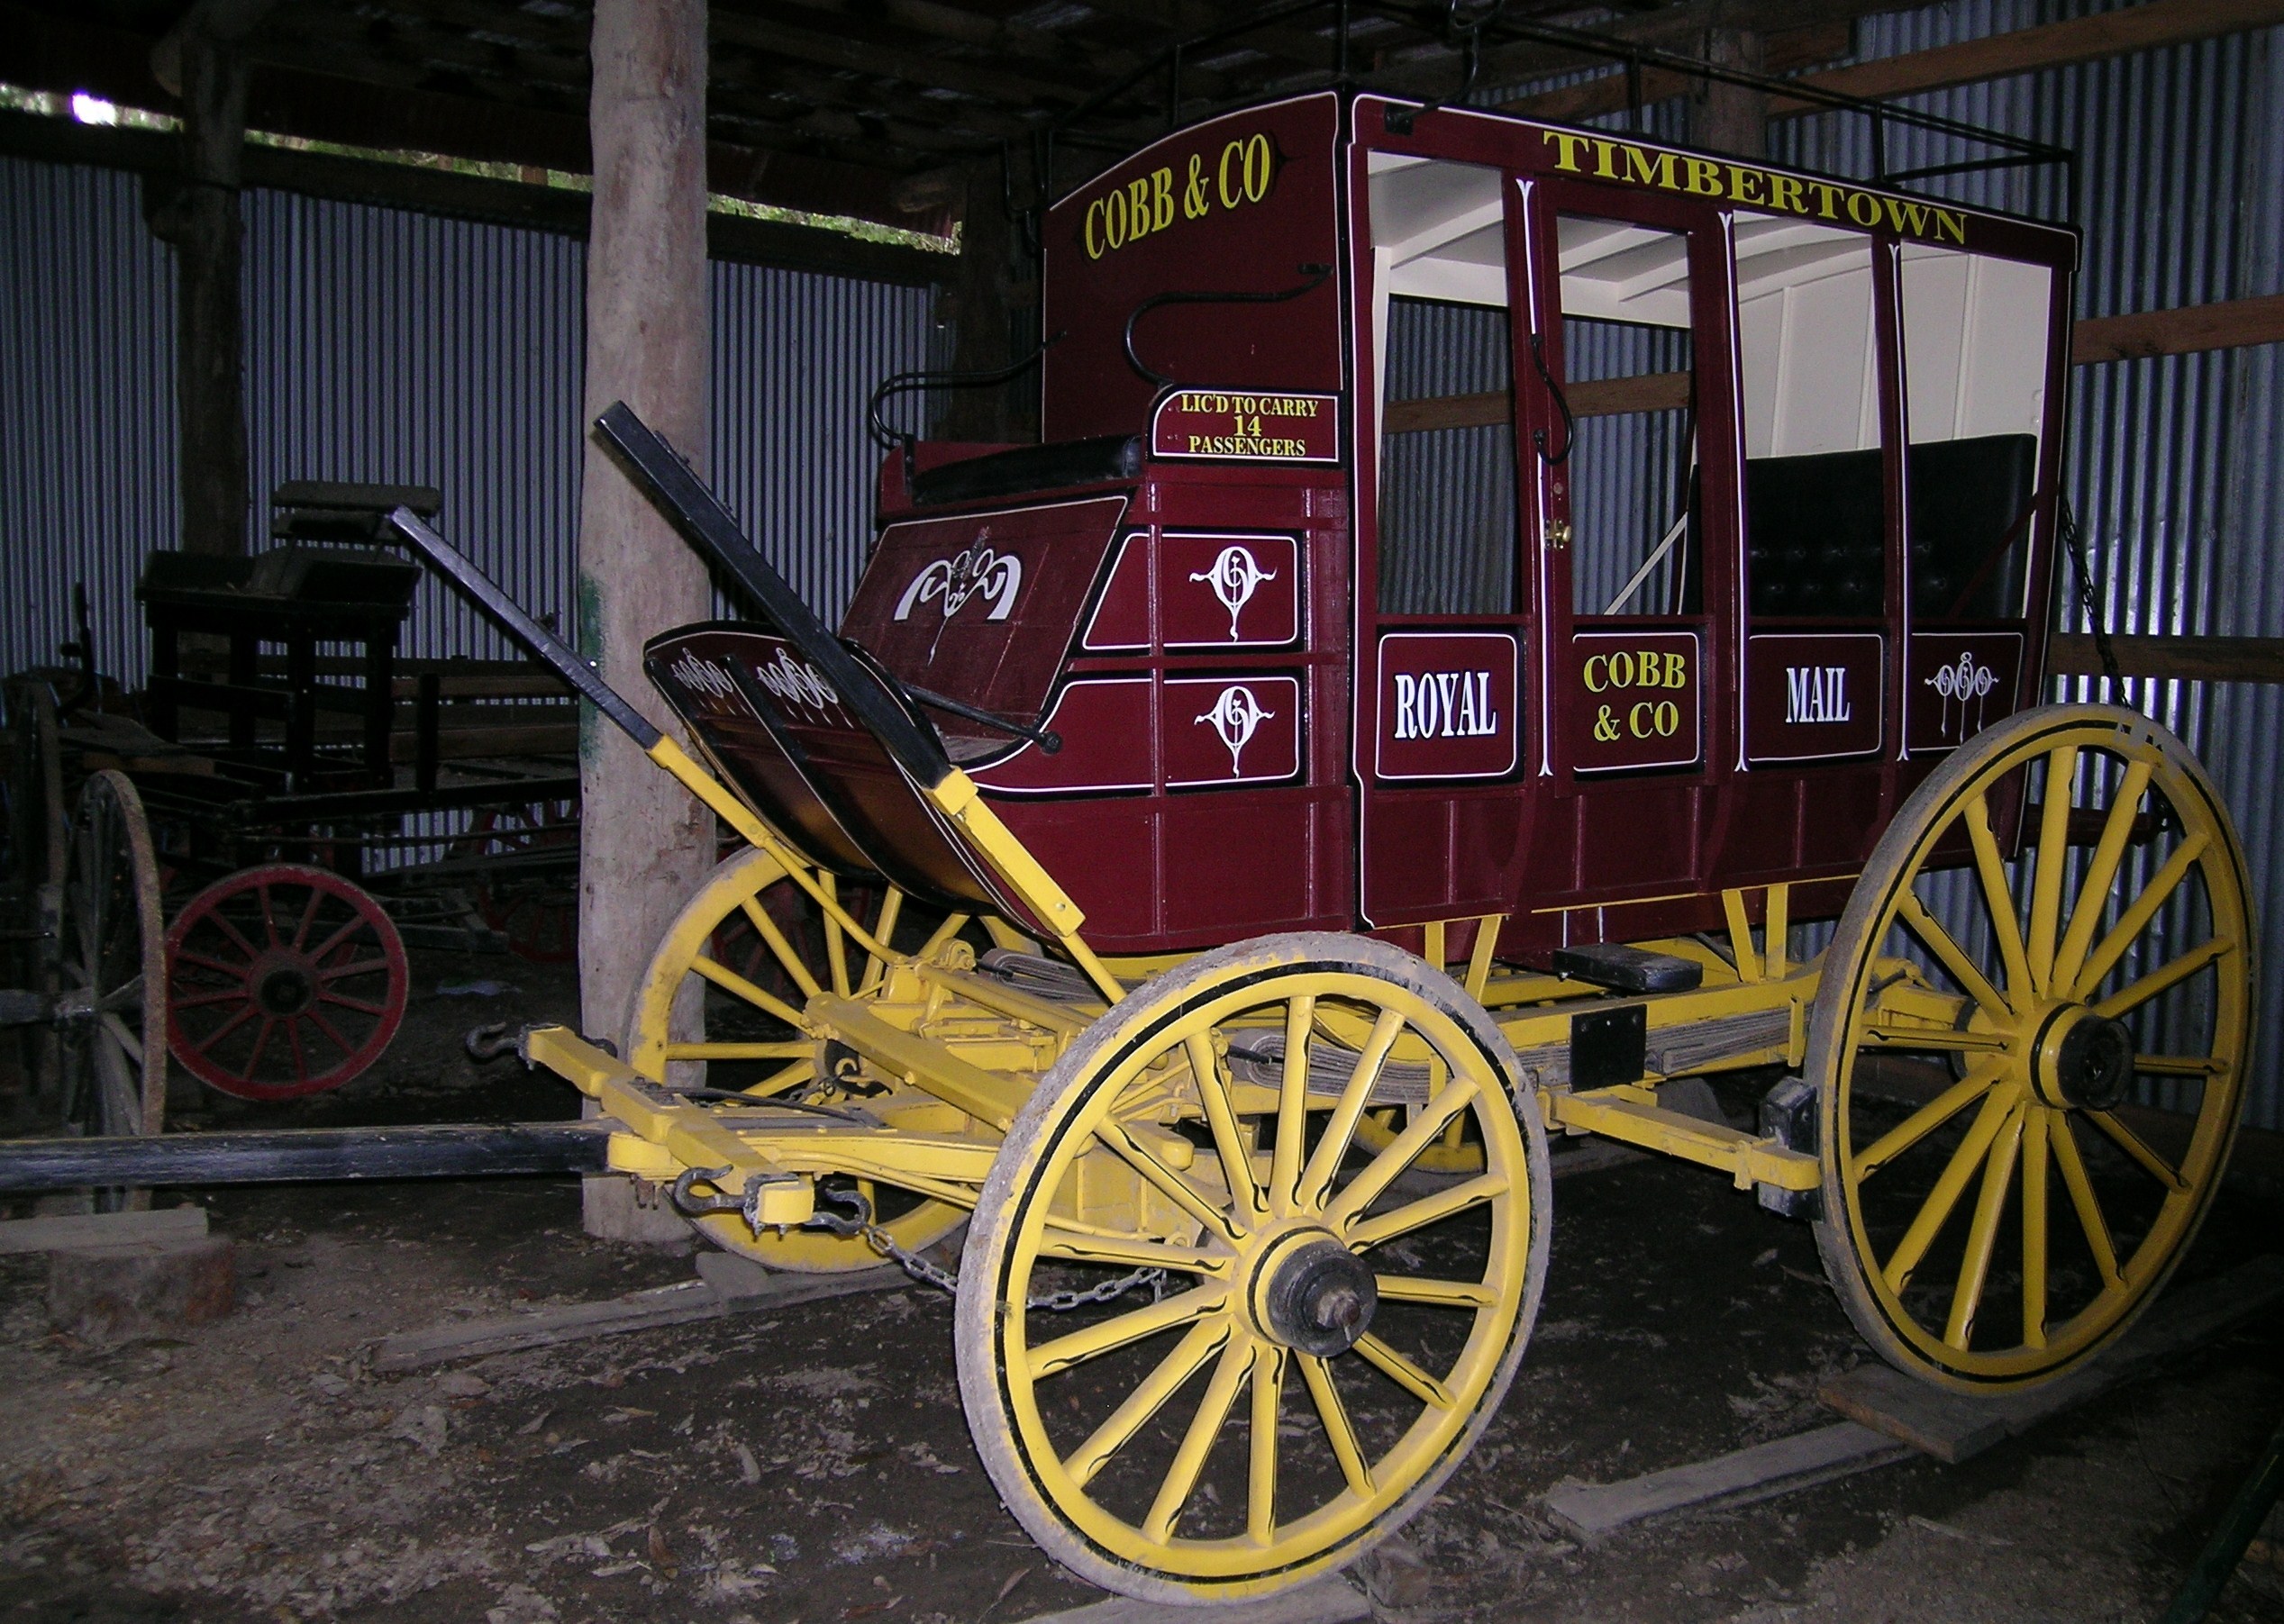 A preserved Cobb & Co Australian Royal Mail Coach with Concord mud-coach undercarriage. Photo taken at Timbertown, Wauchope, NSW Australia, on March 4, 2009.